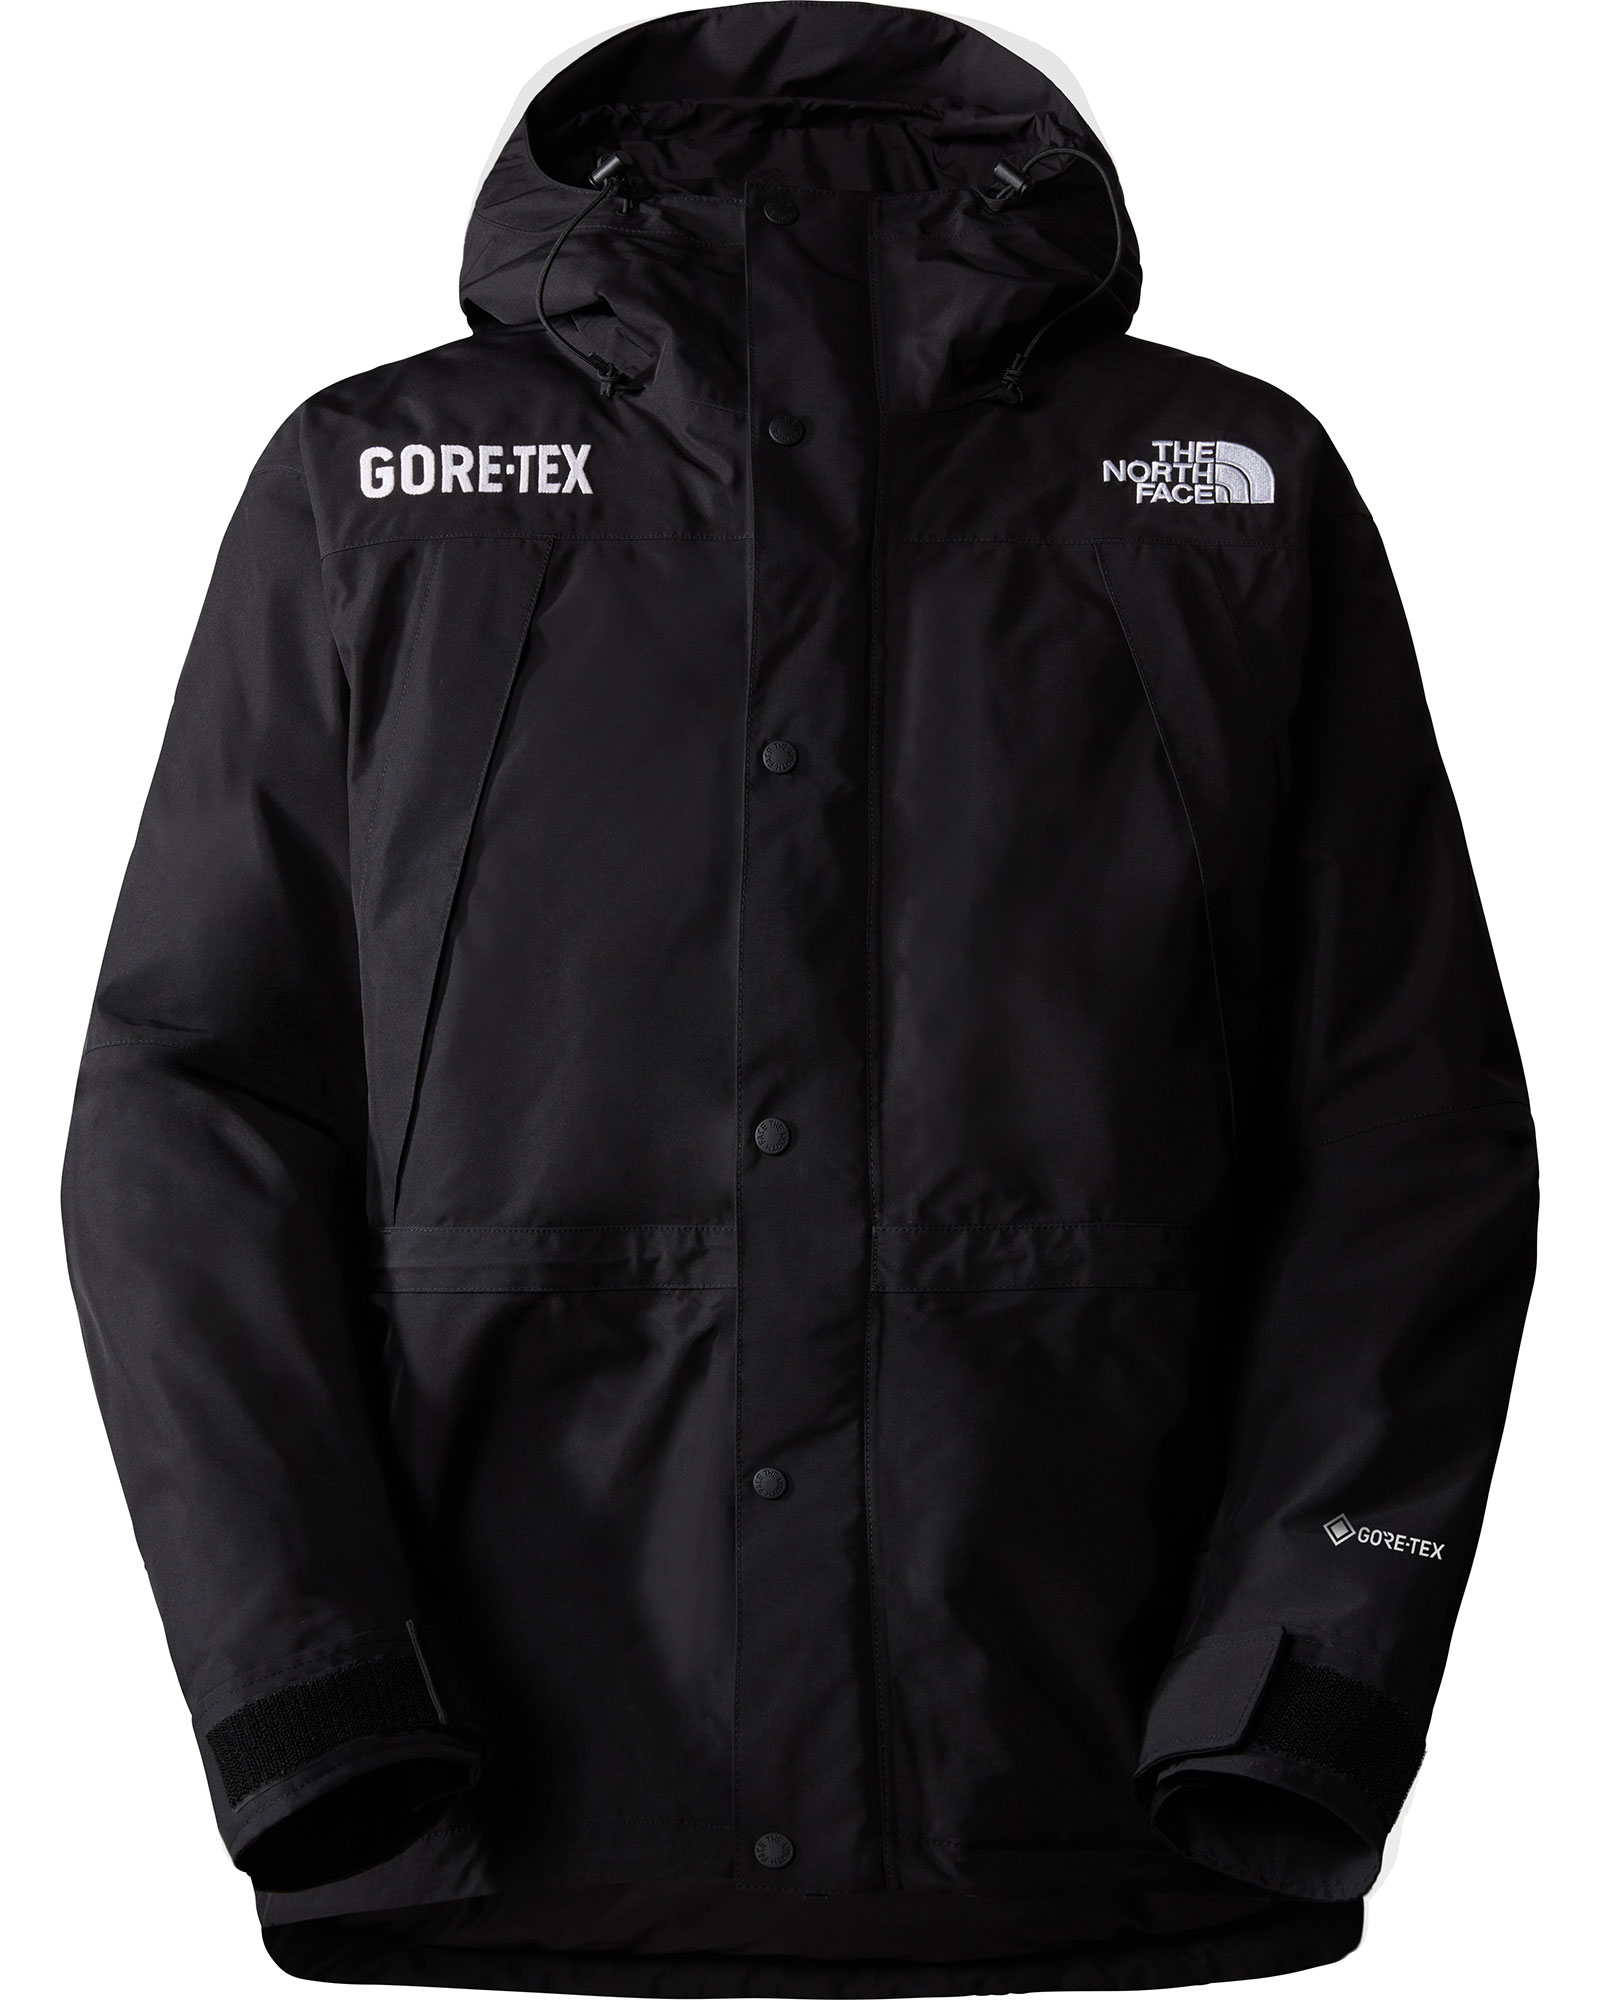 The North Face Men’s Mountain Guide Insulated GORE TEX Jacket - TNF Black L